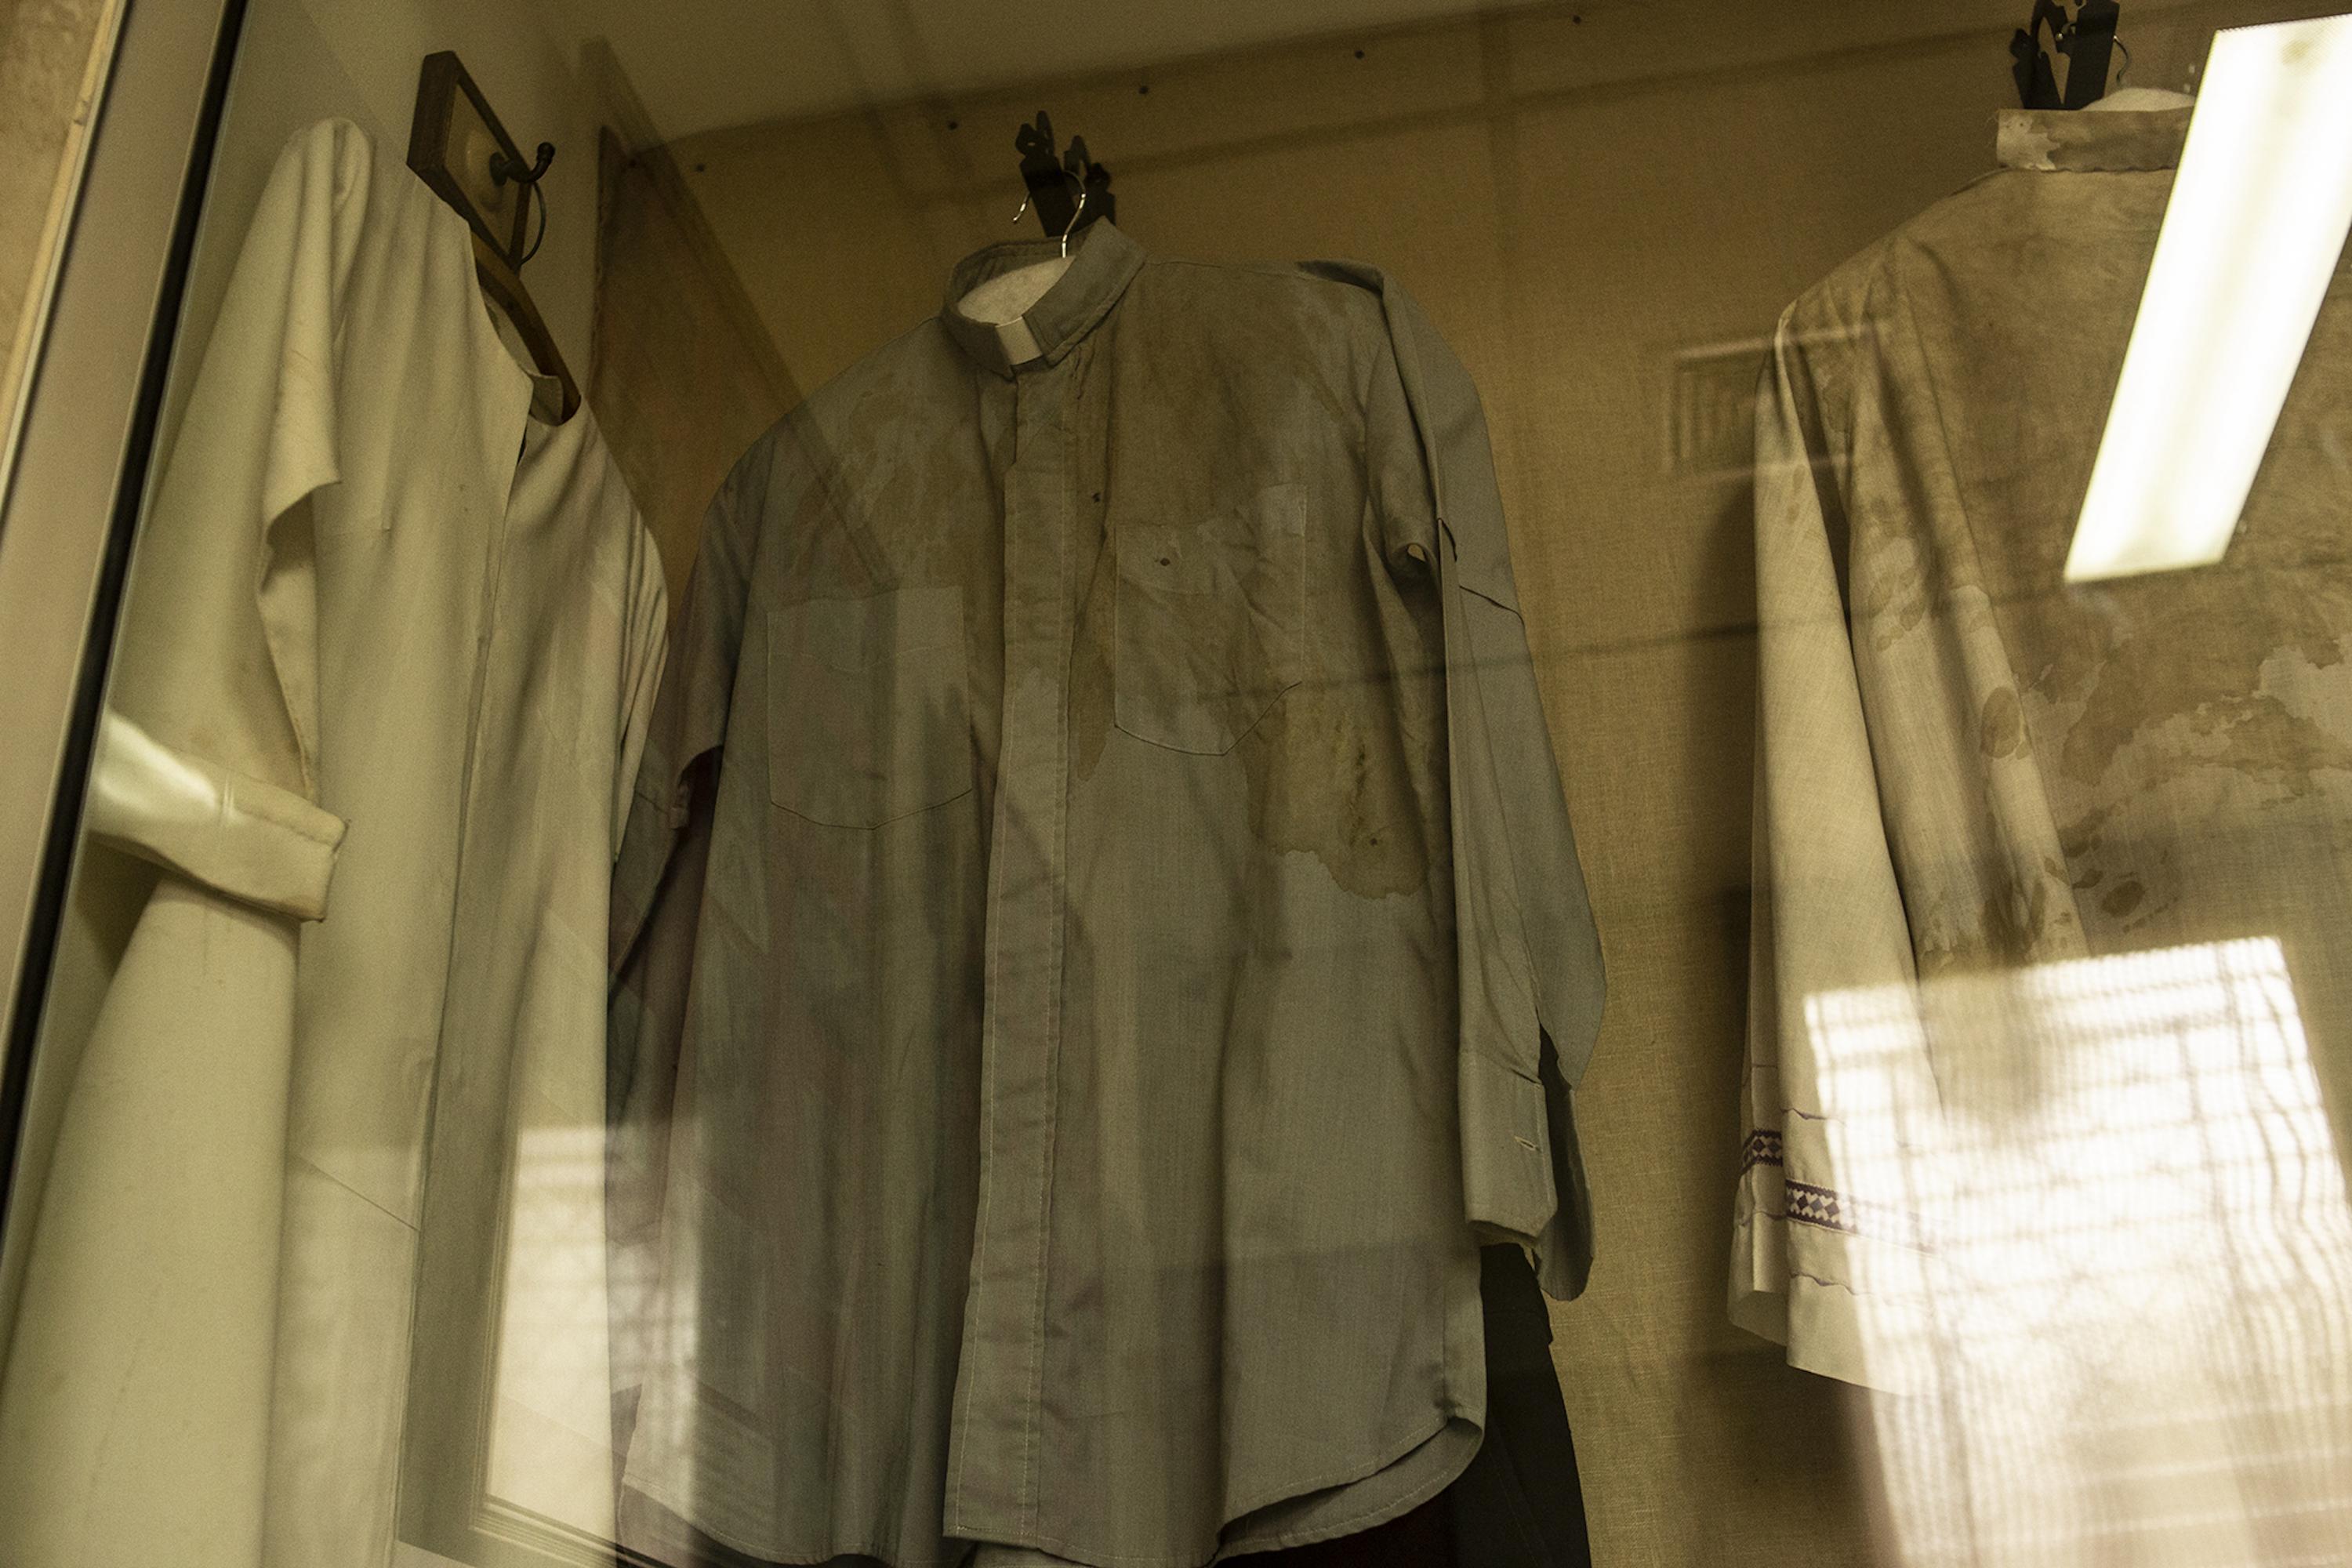 The vestments that Monsignor Romero used for his last mass are now kept in the bedroom of his small house on the grounds of the Divine Providence Hospital. Today the house is a museum. The blood stains and bullet hole are visible on the left side of the gray shirt. Photo for El Faro: Carlos Barrera.